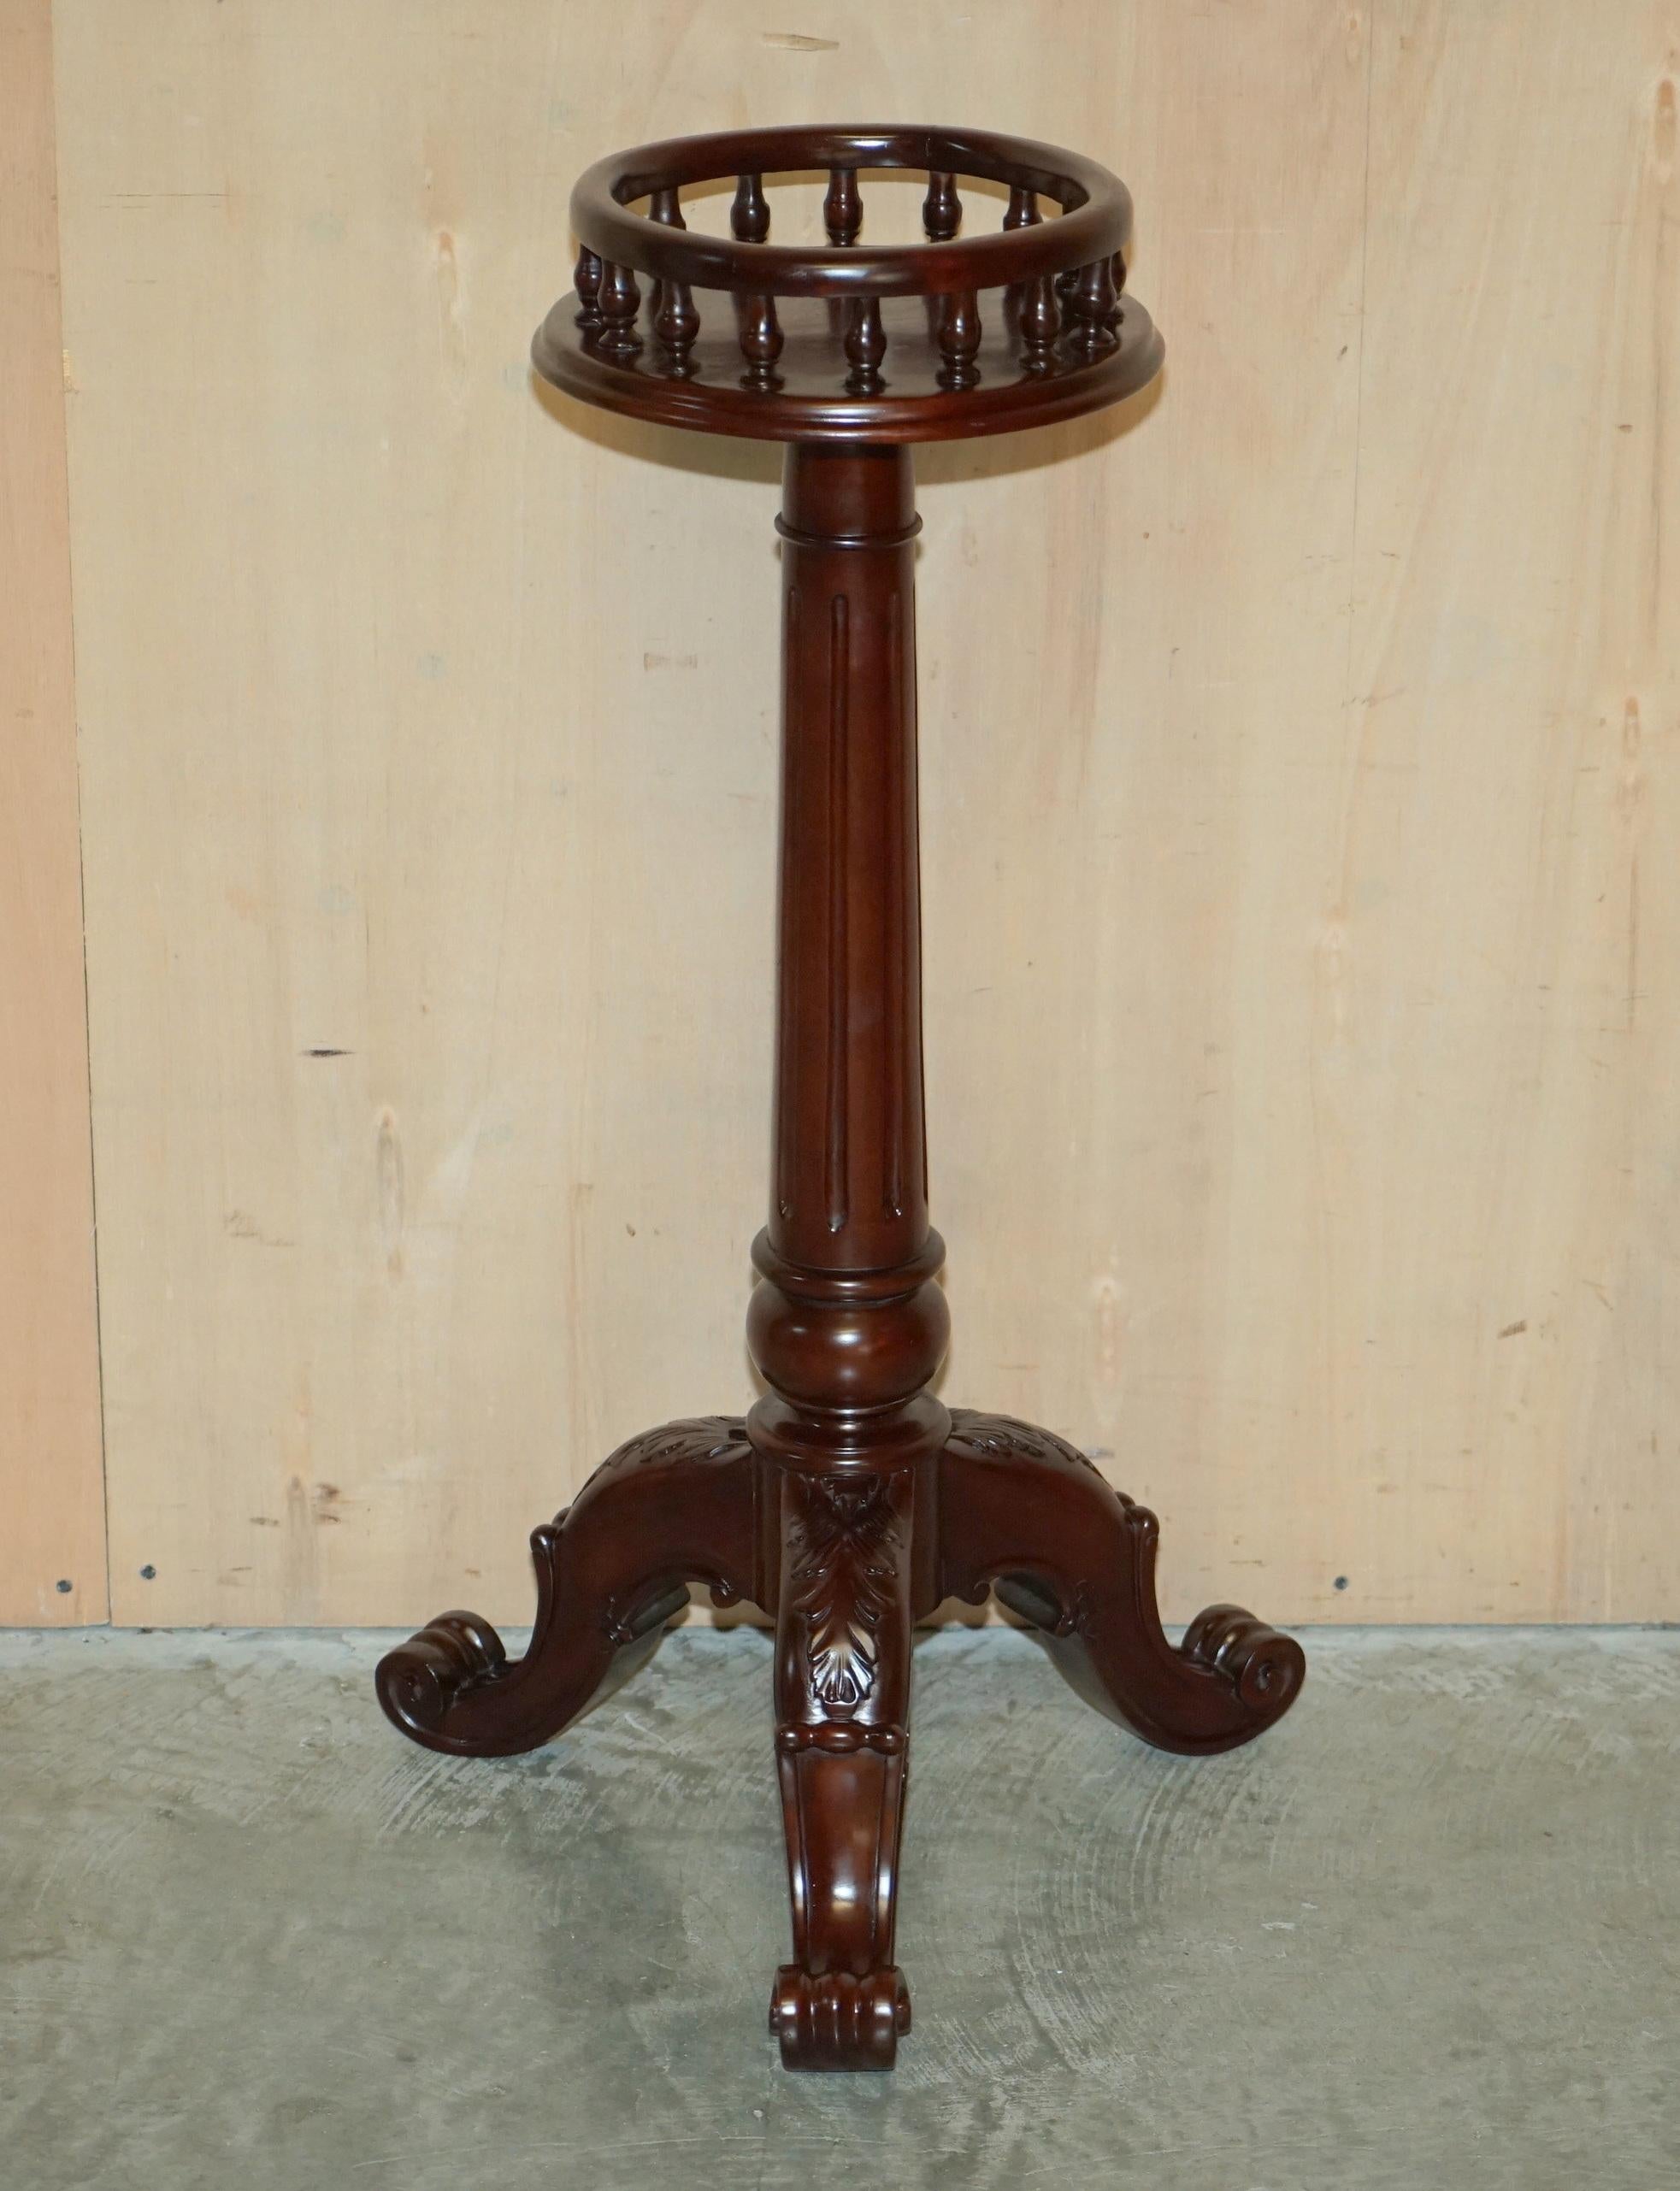 We are delighted to offer for sale this stunning vintage mahogany Thomas Chippendale style Plant stands.

A very decorative and good looking pair, they are solid mahogany, designed to seat plants or pieces of sculpture, the height and general